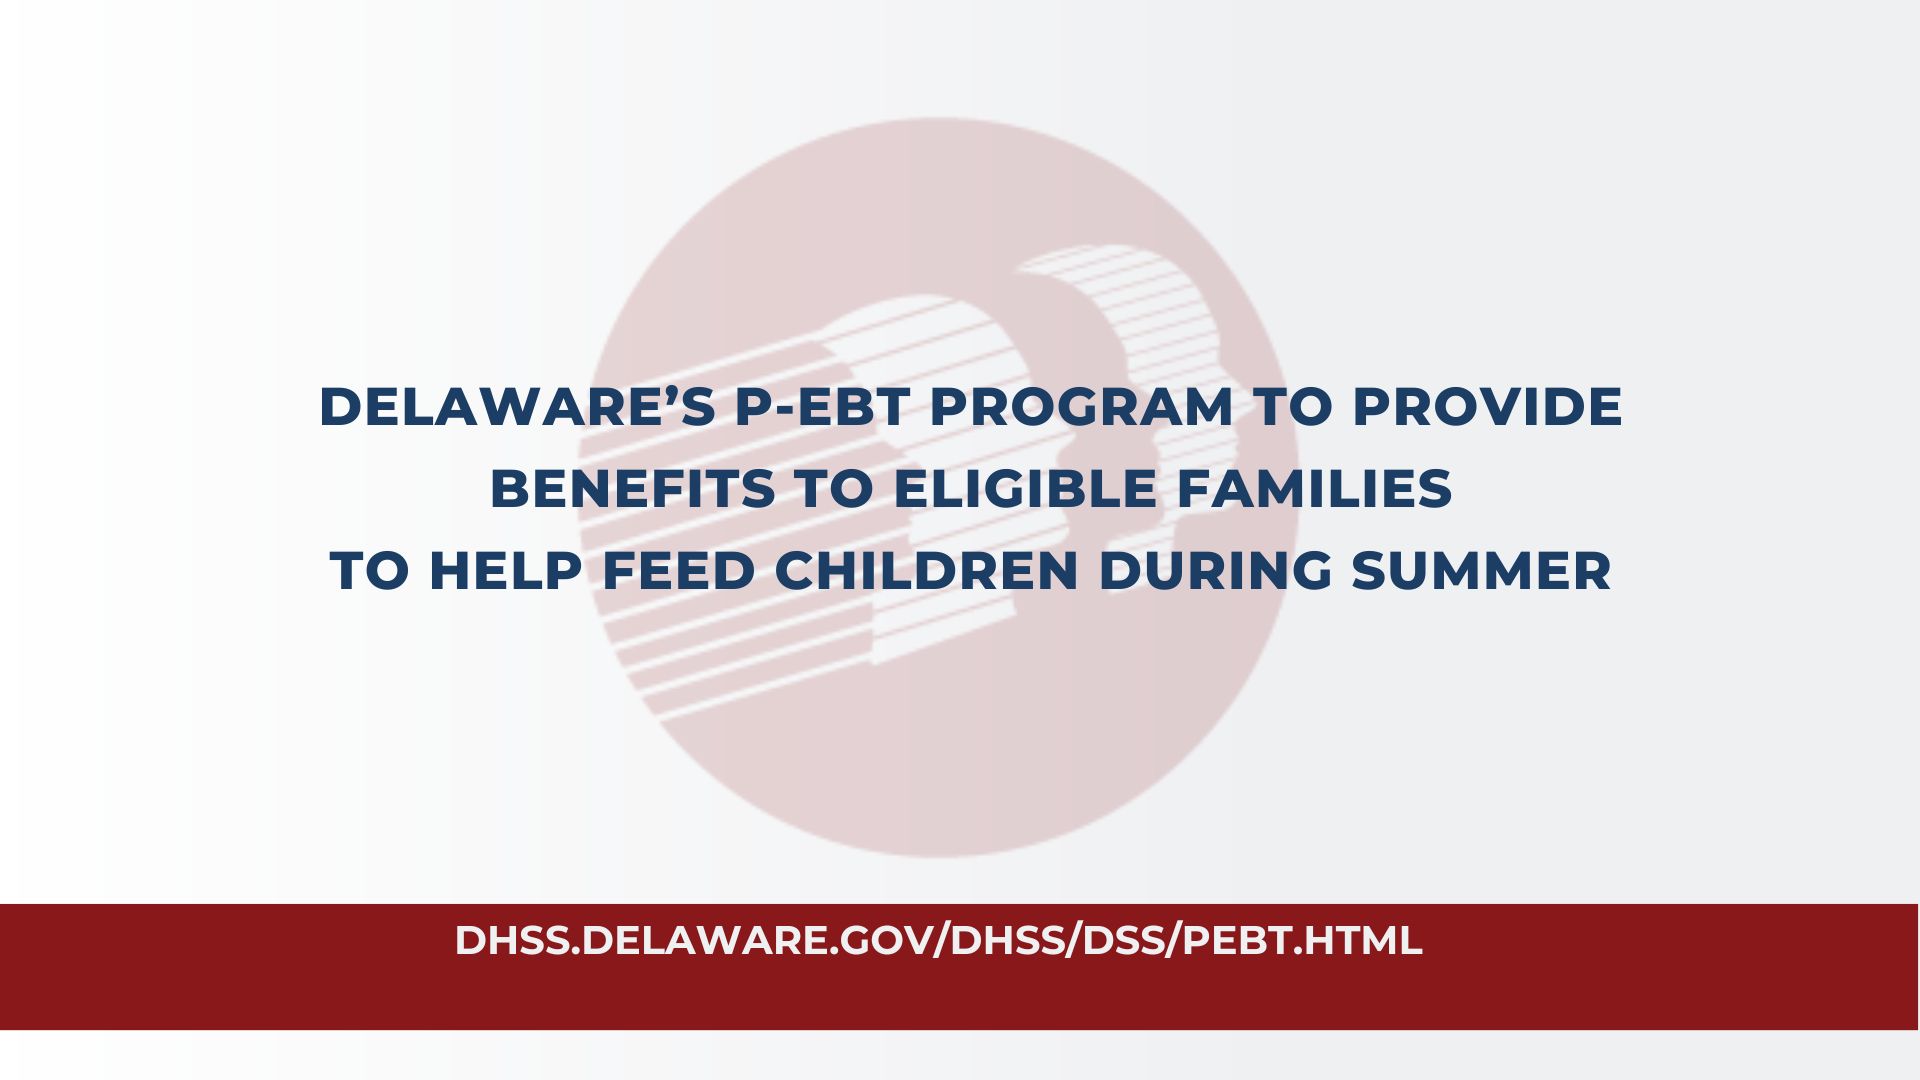 DELAWARE’S P-EBT PROGRAM TO PROVIDE BENEFITS TO ELIGIBLE FAMILIES TO HELP FEED CHILDREN DURING SUMMER